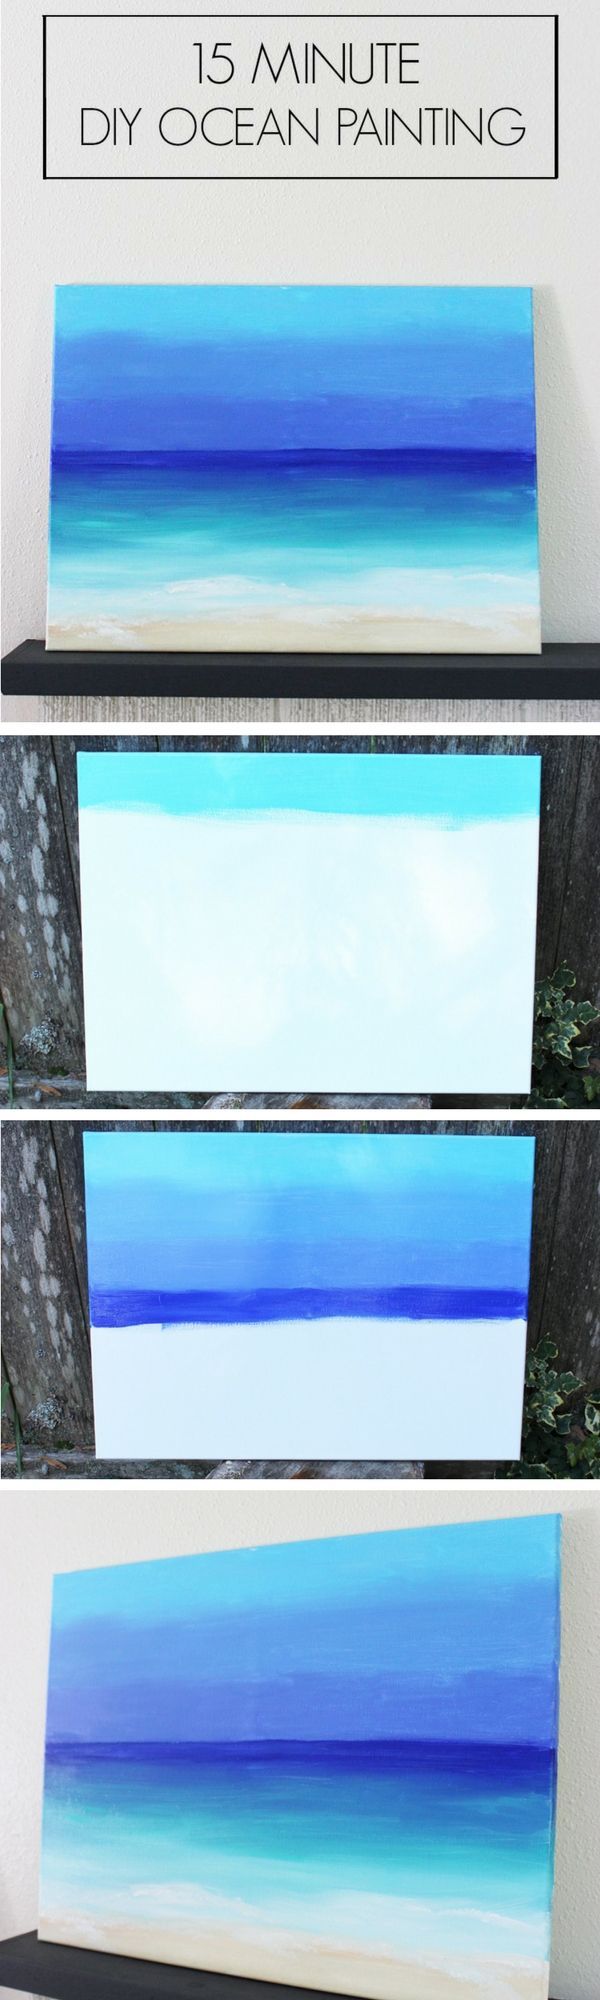 Check out the tutorial on how to make a DIY ocean view painting in 15 minutes (great for summer decor) @istandarddesign